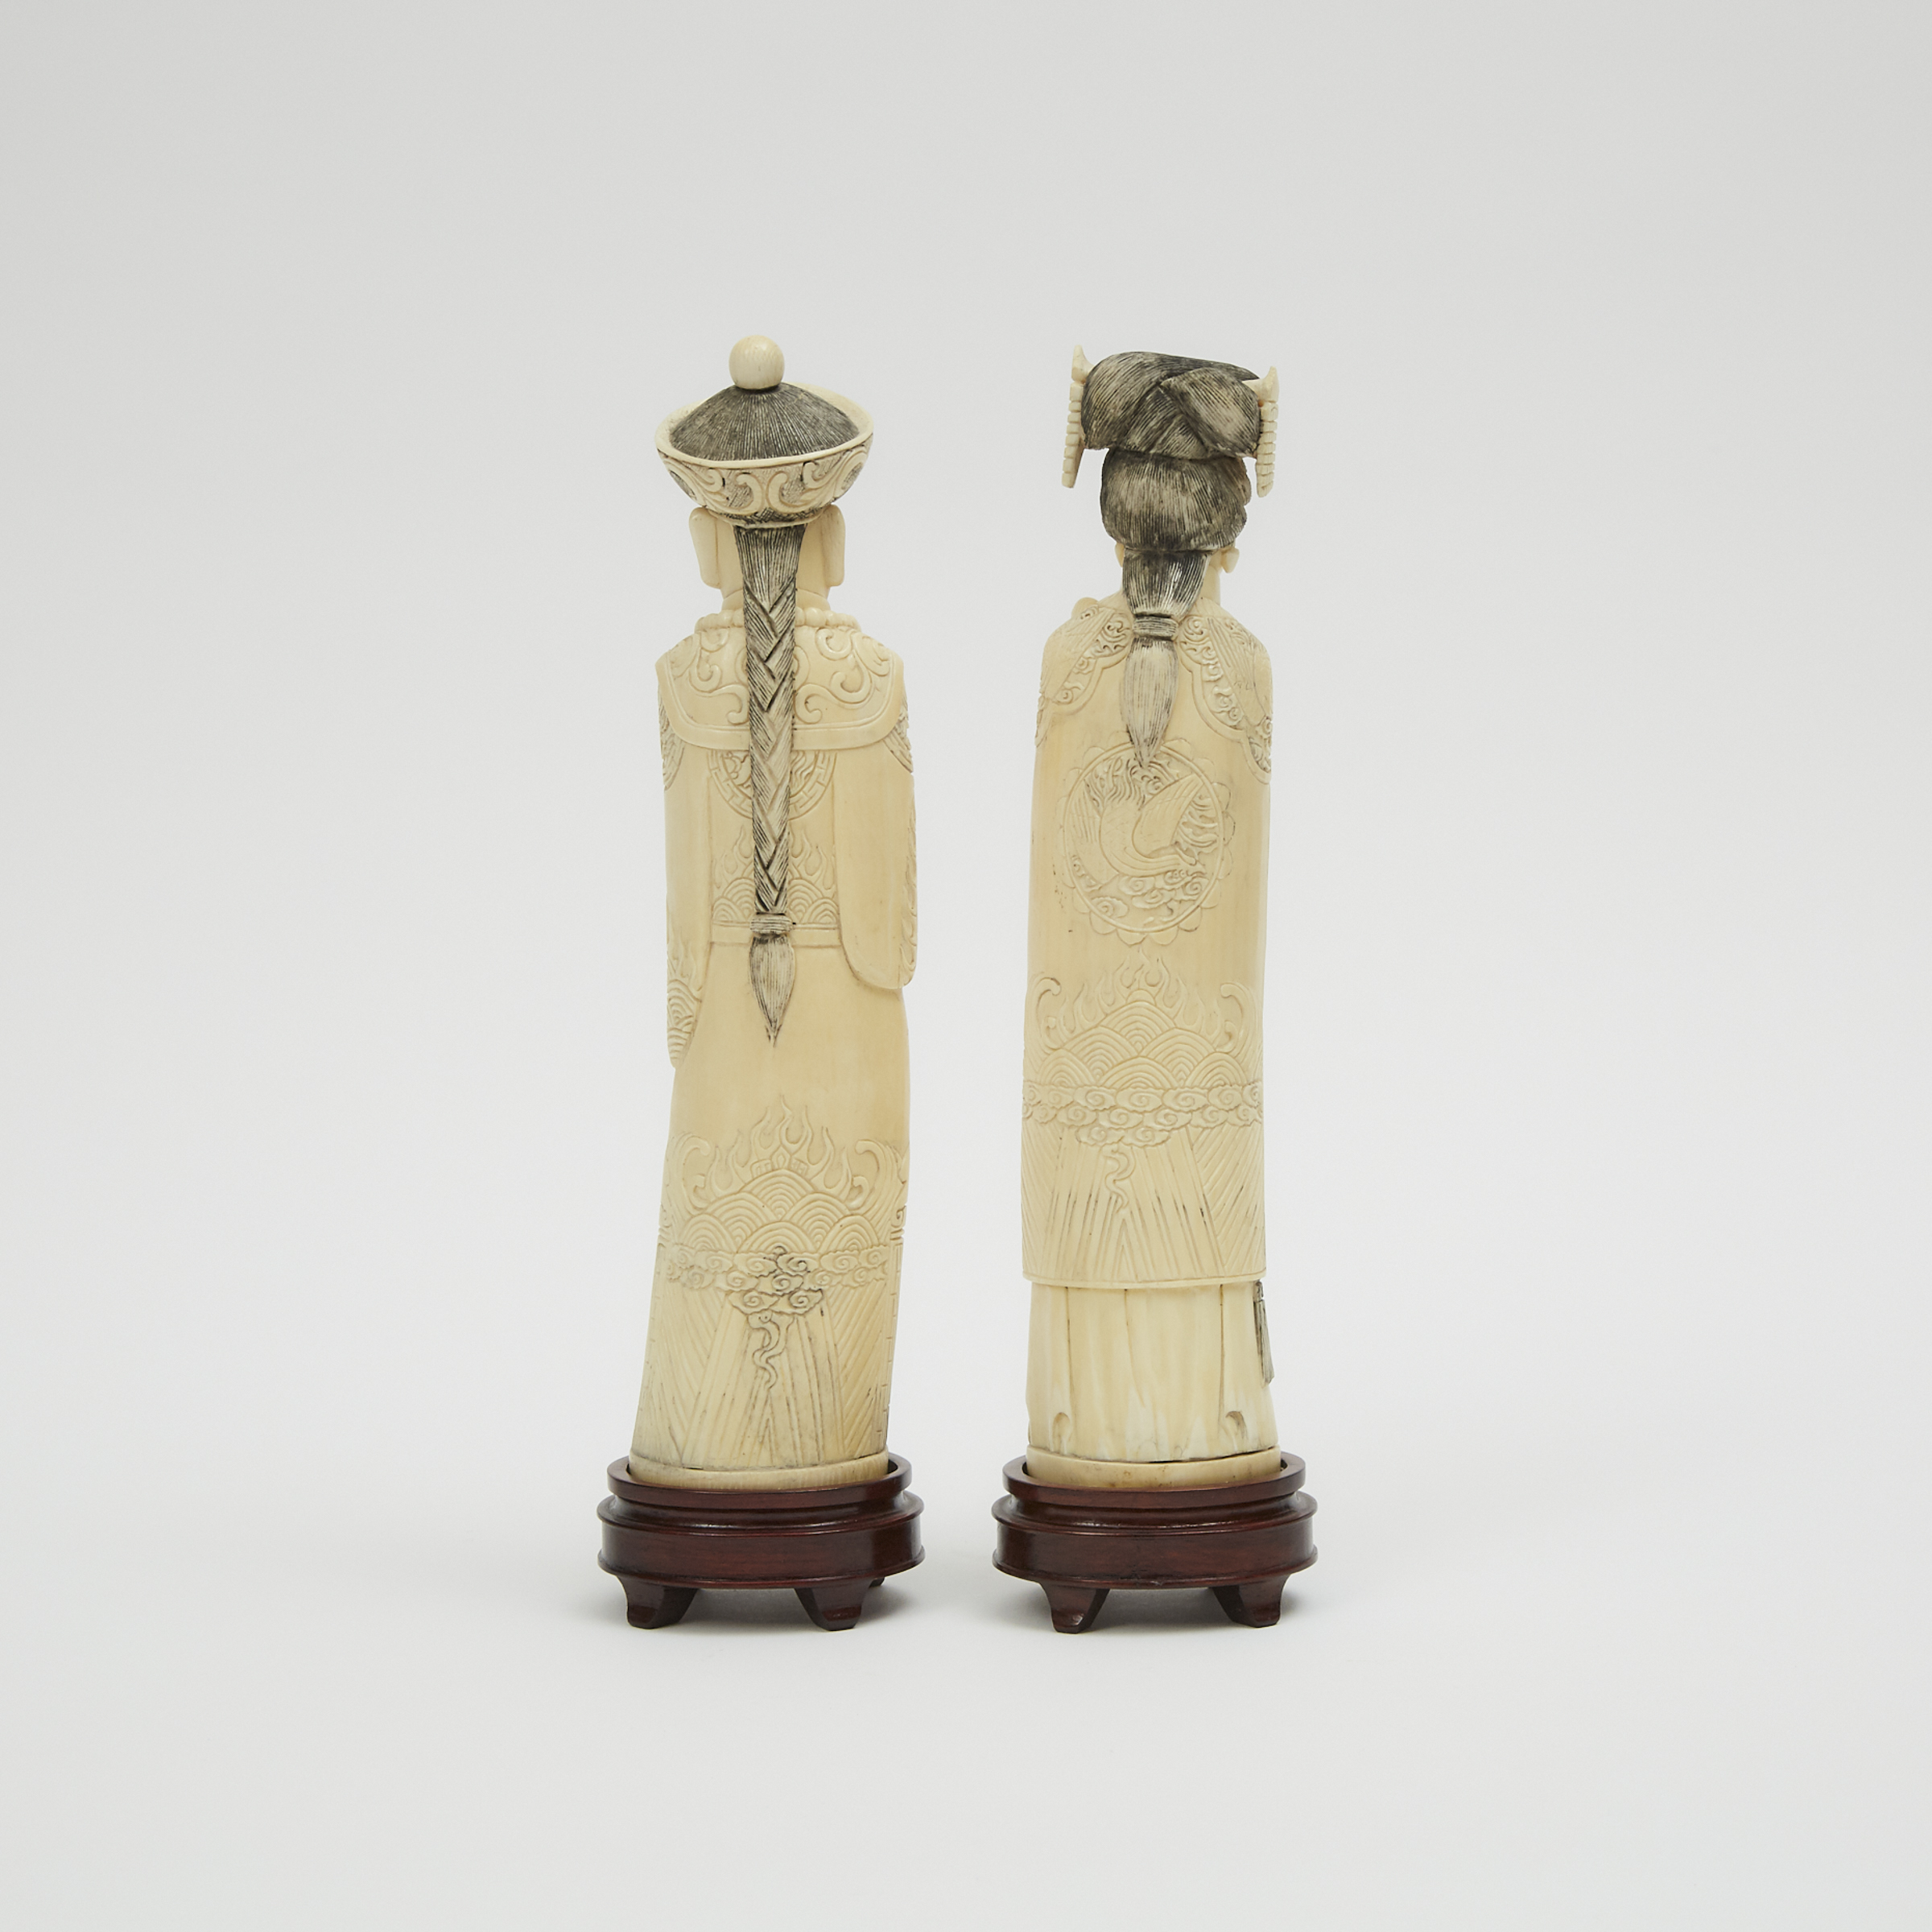 An Ivory Carved Emperor and Empress Pair, Circa 1940